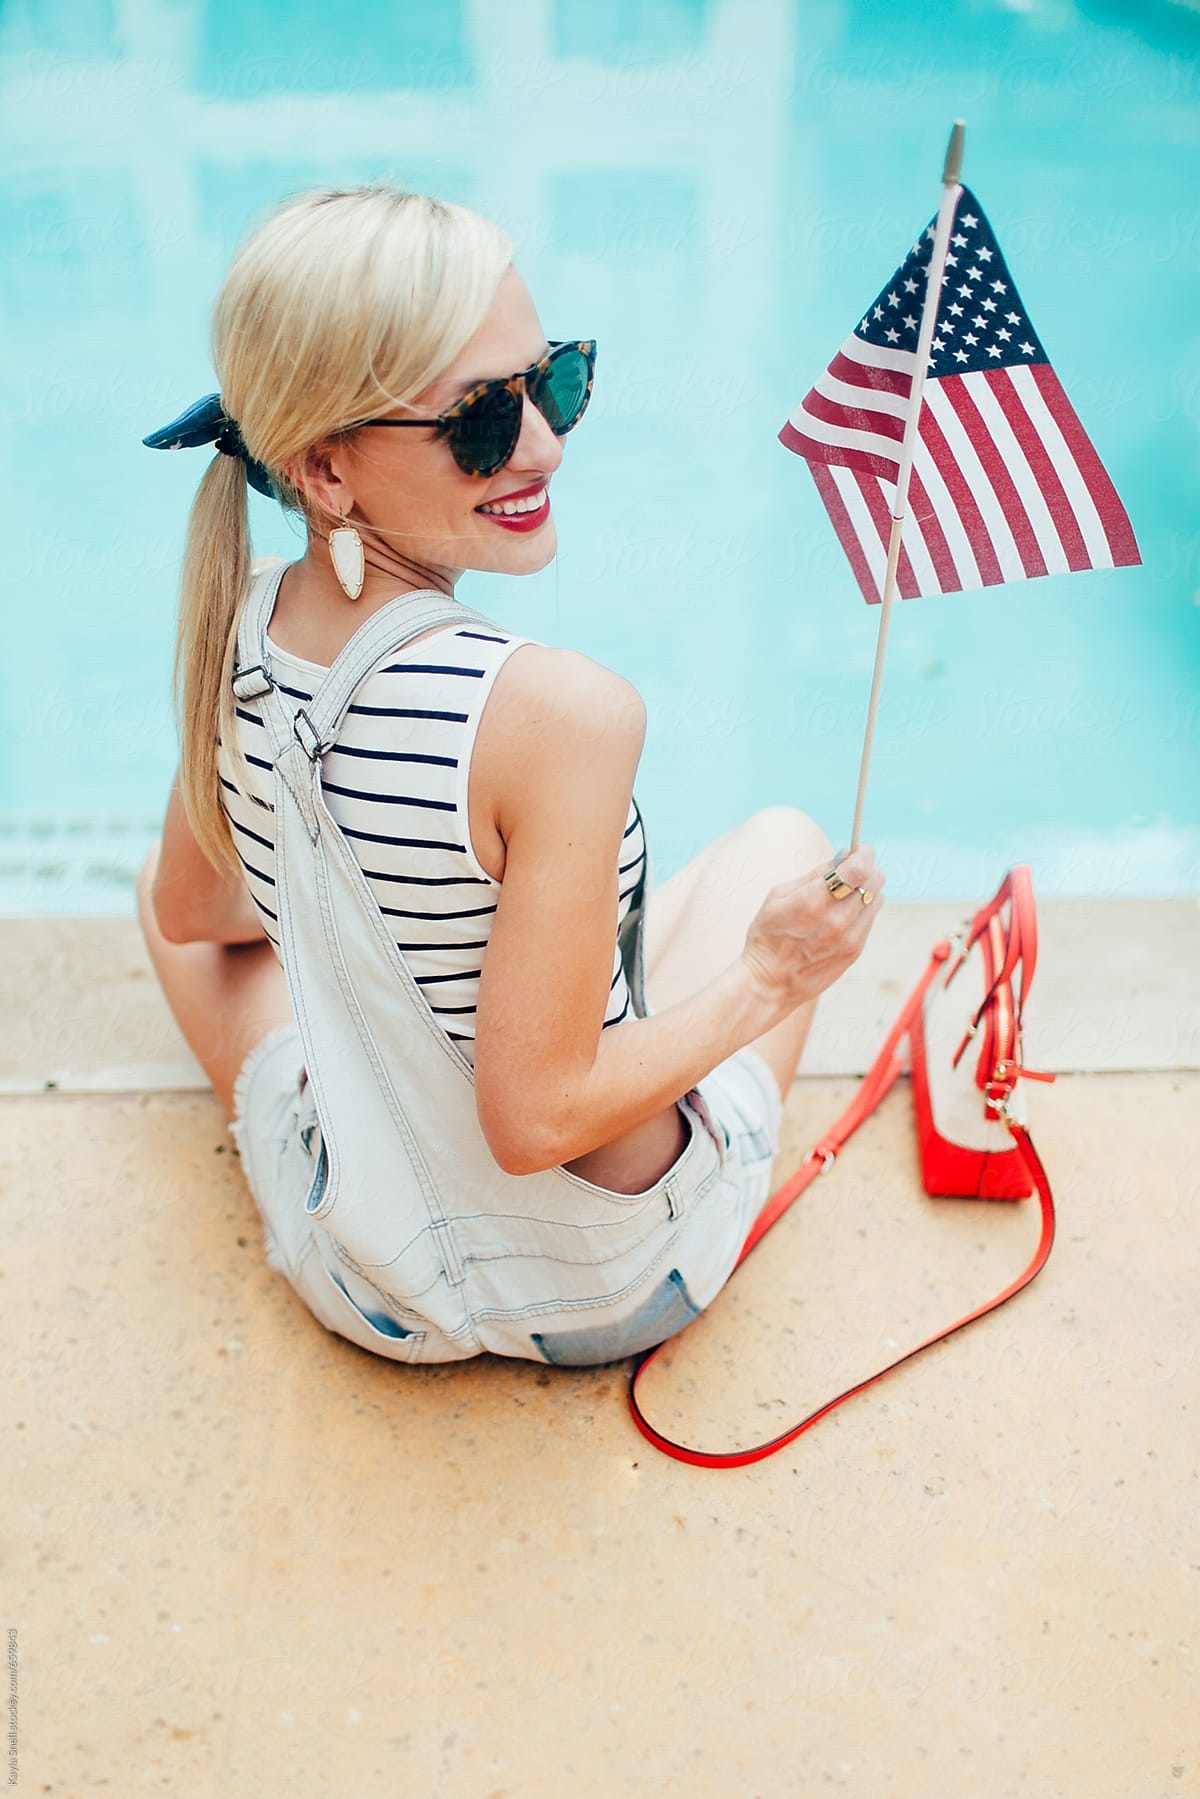 A young woman celebrates fourth of july by the pool